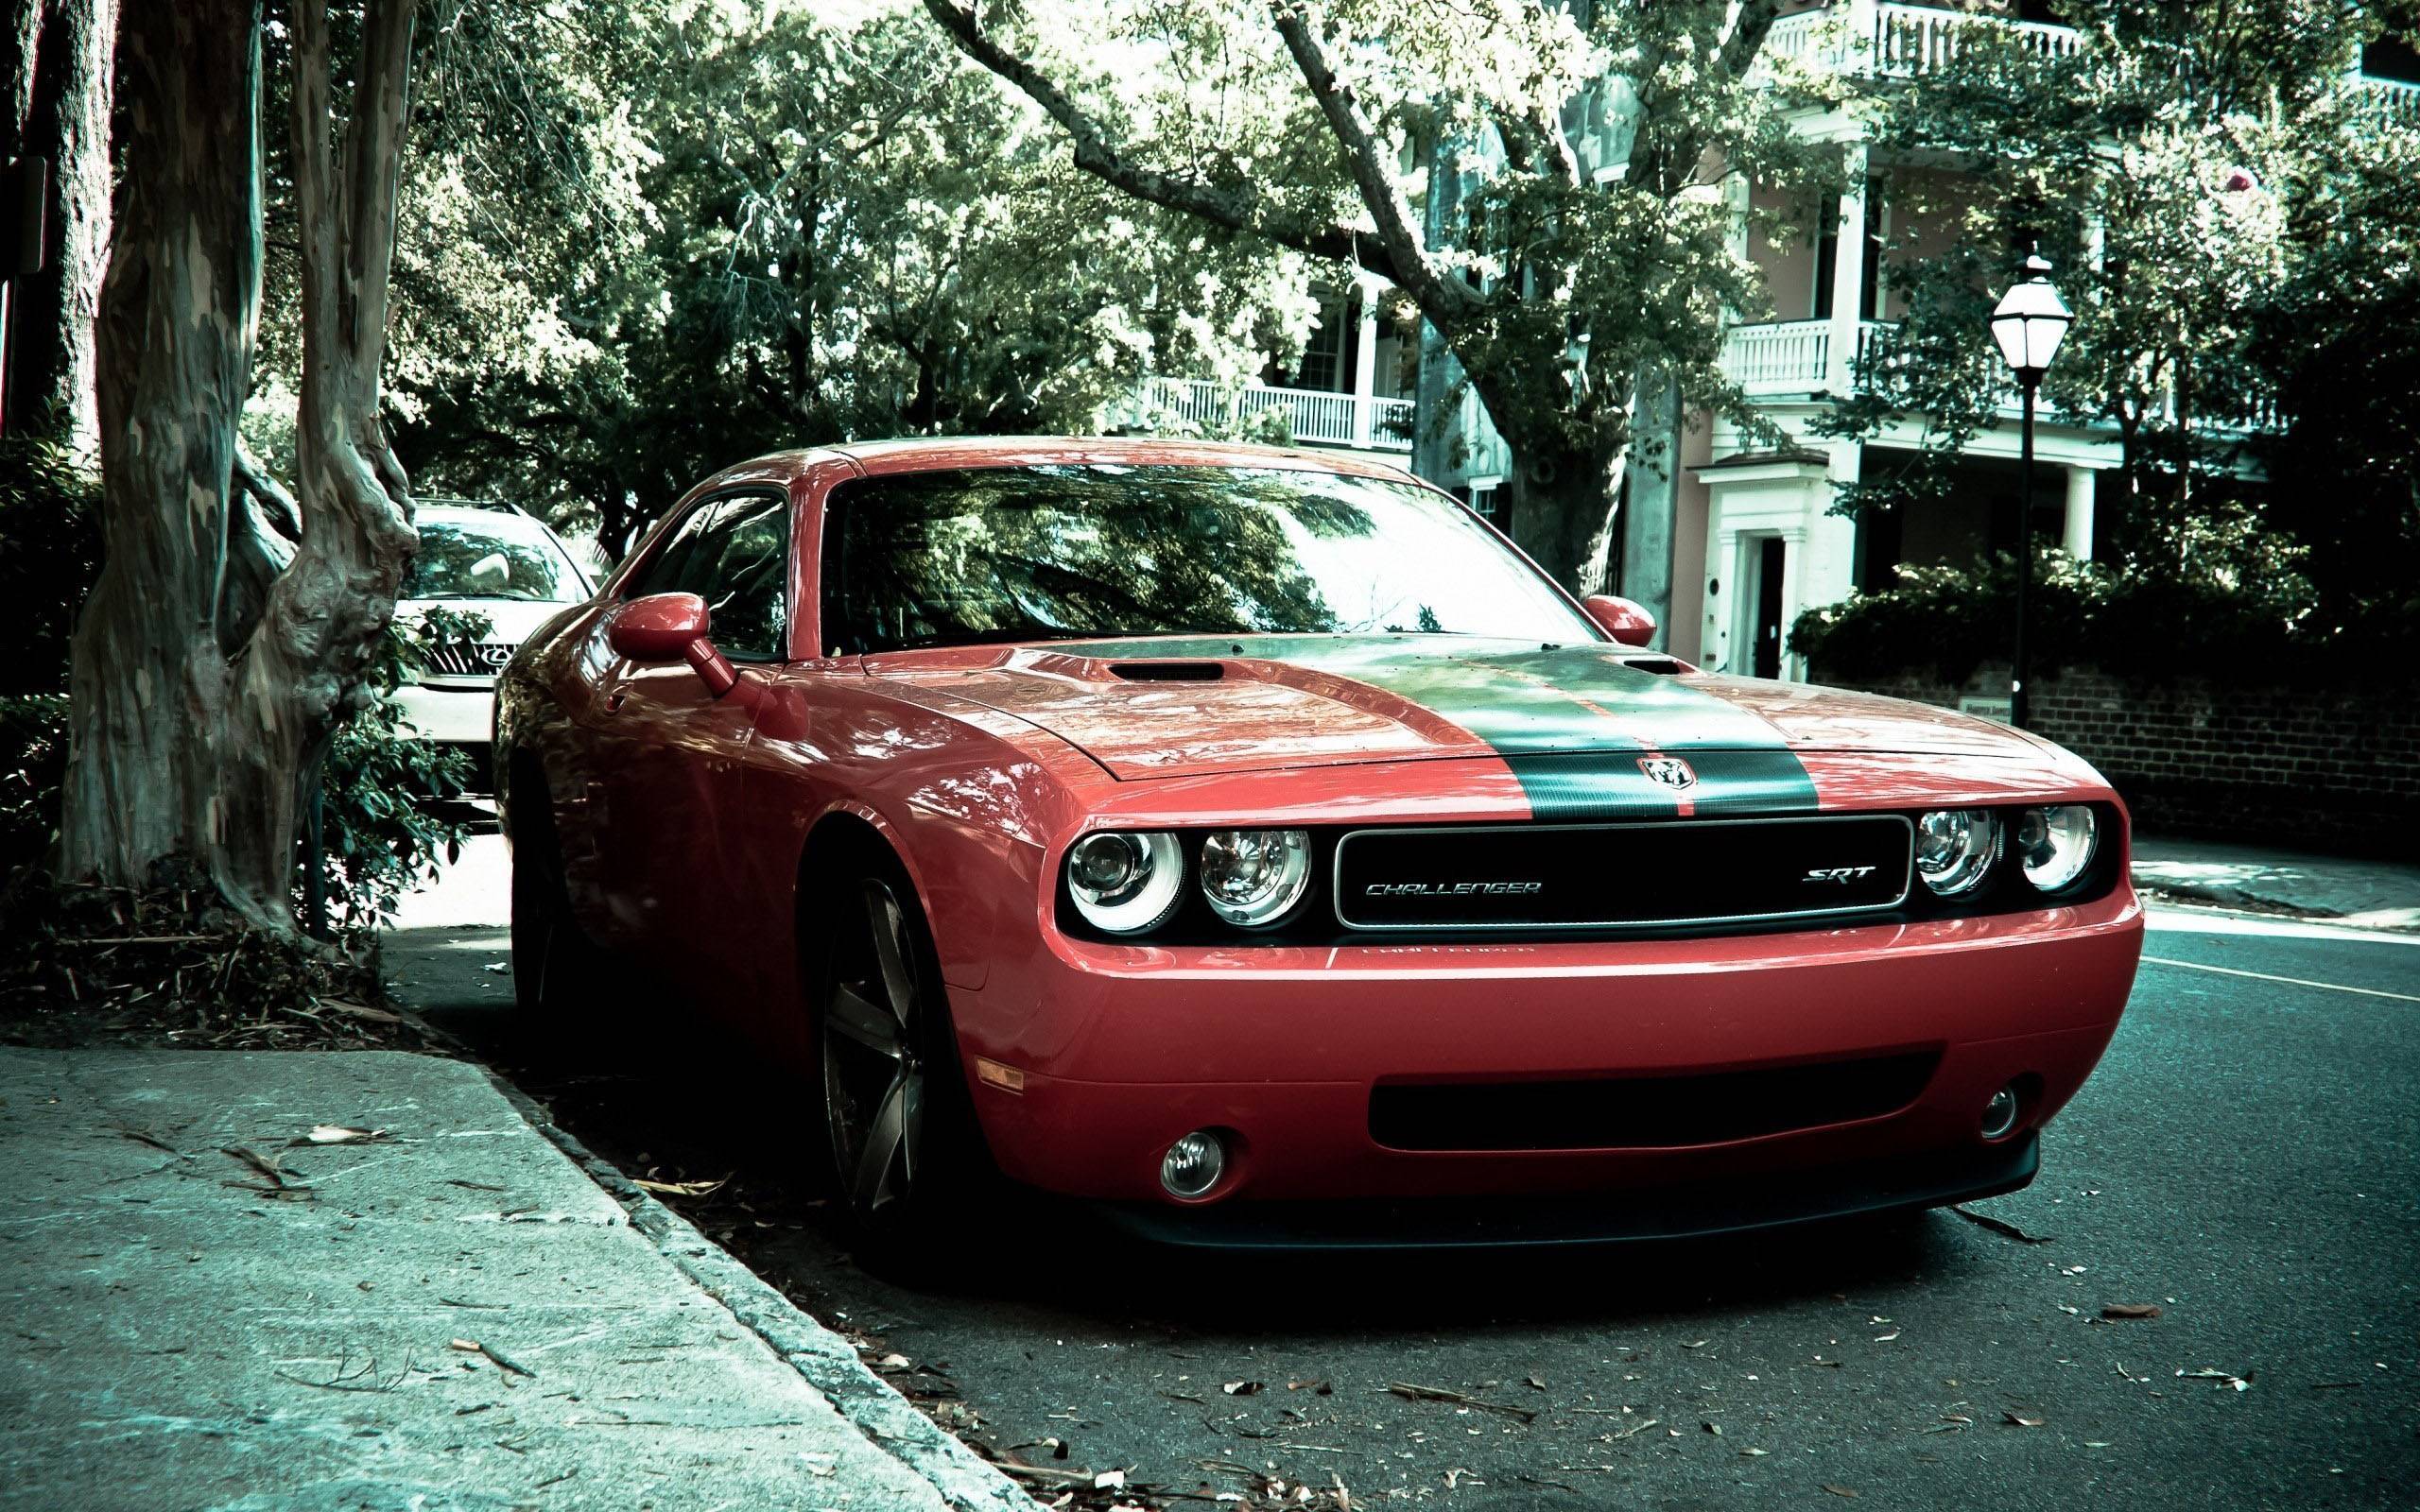 Muscle Car Hd Wallpapers For Mobile Phones